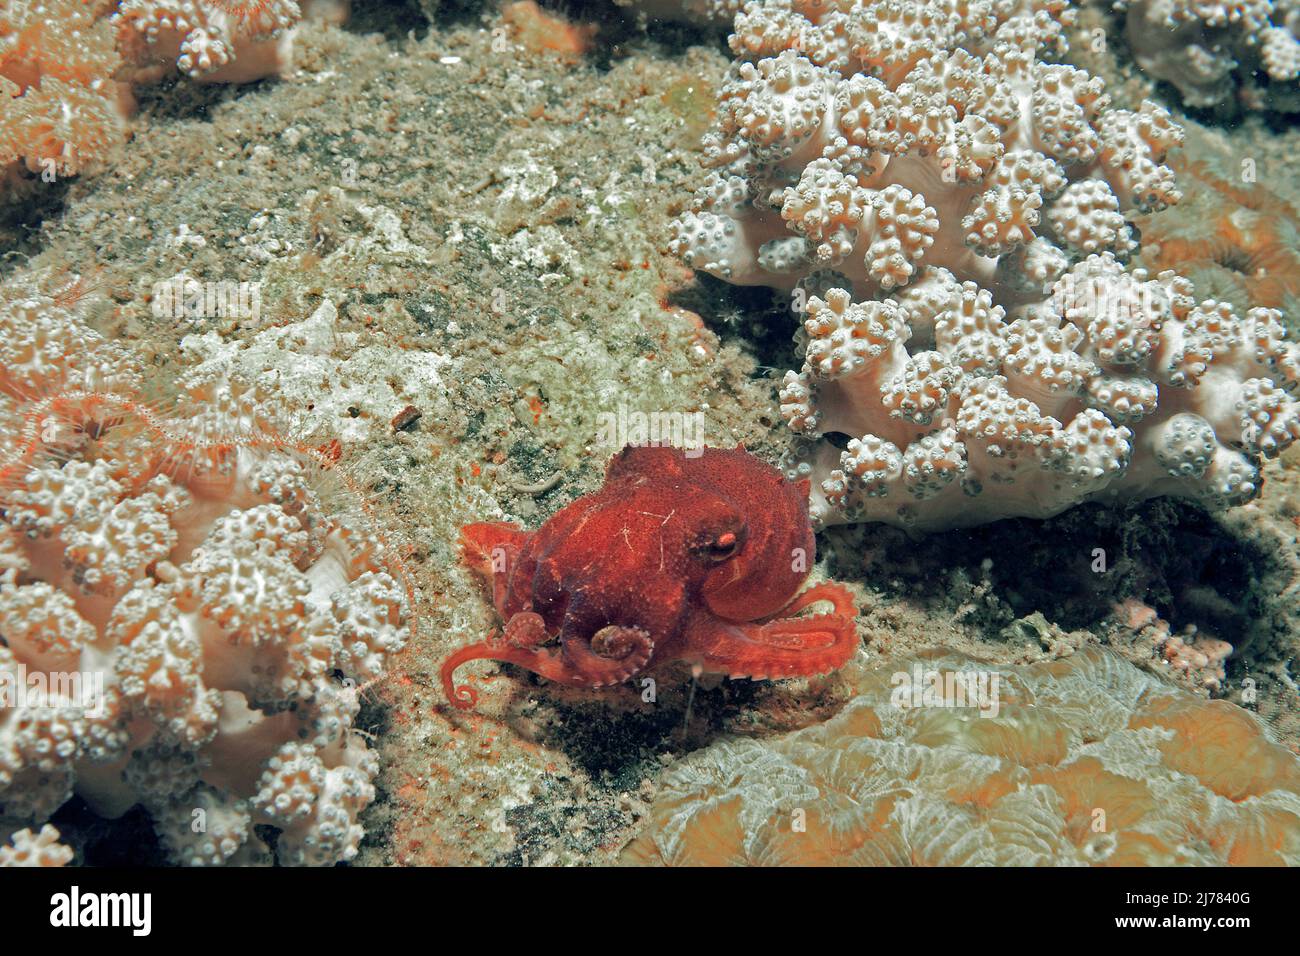 Tiny red Octopus (Octopus sp.) in a coral reef, Puerto Galera, Mindoro, Philippines, Asia Stock Photo